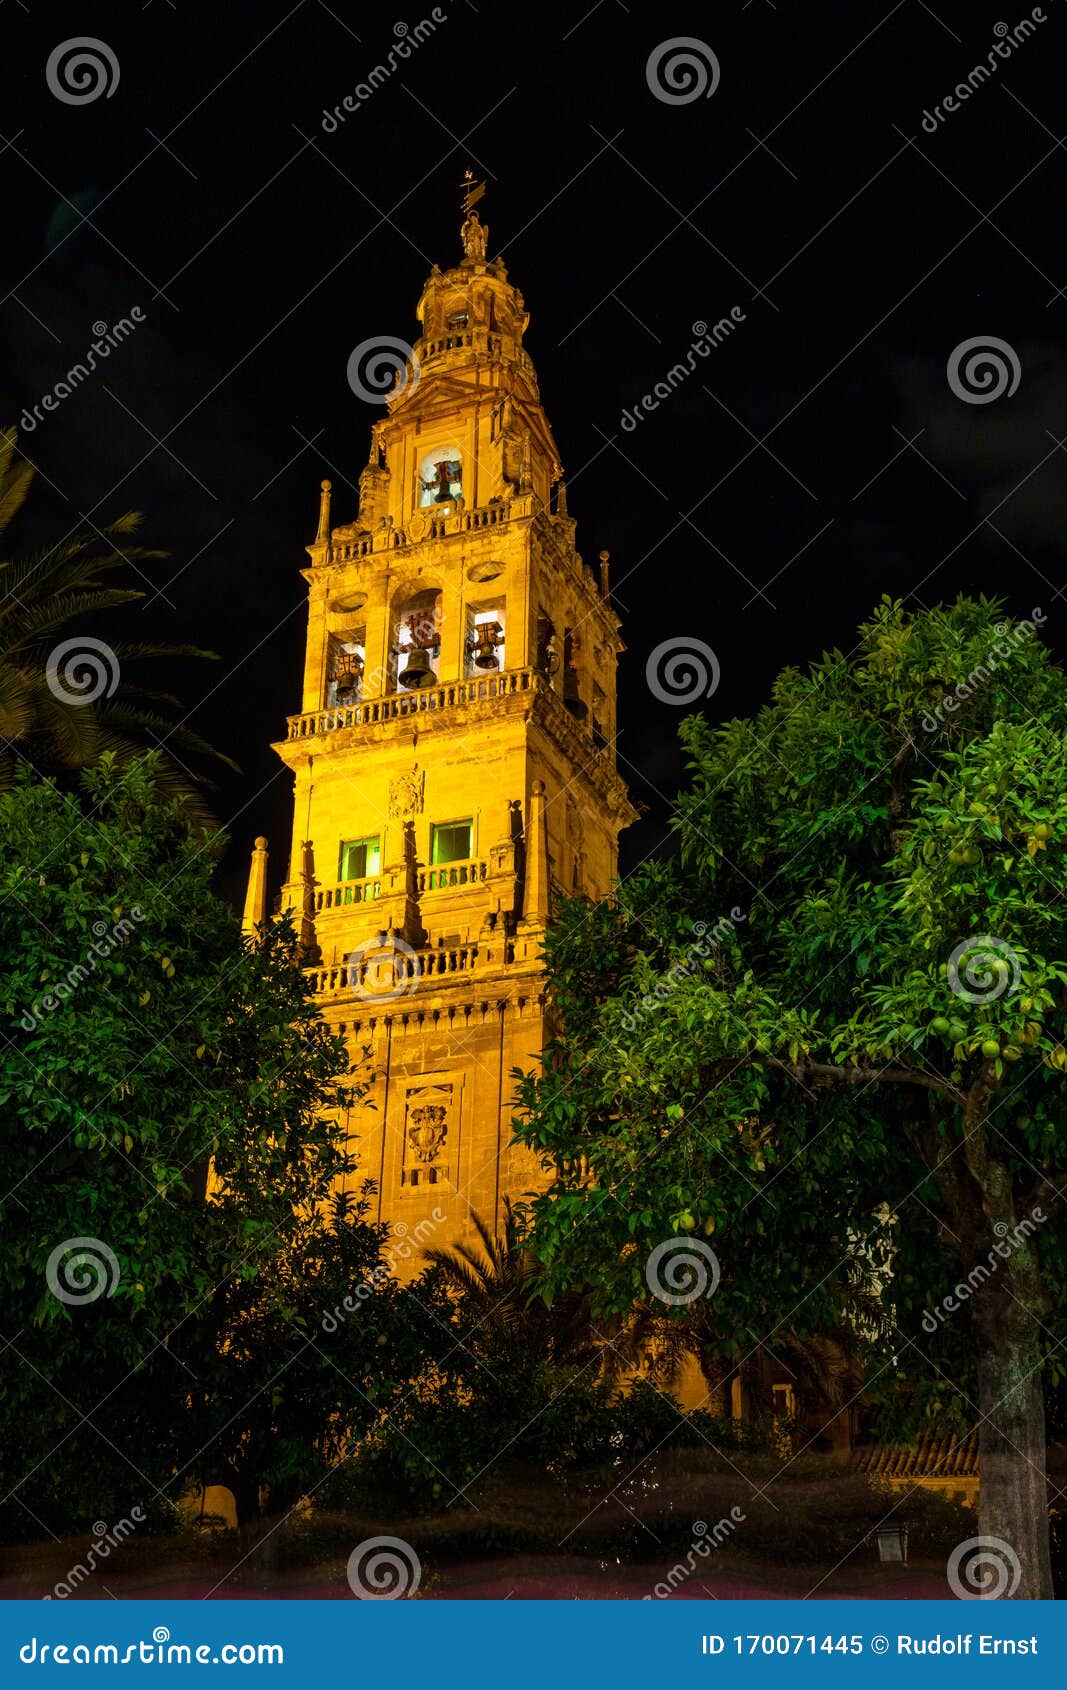 the bell tower, torre campanario at the mosque-cathedral of cordoba, spain